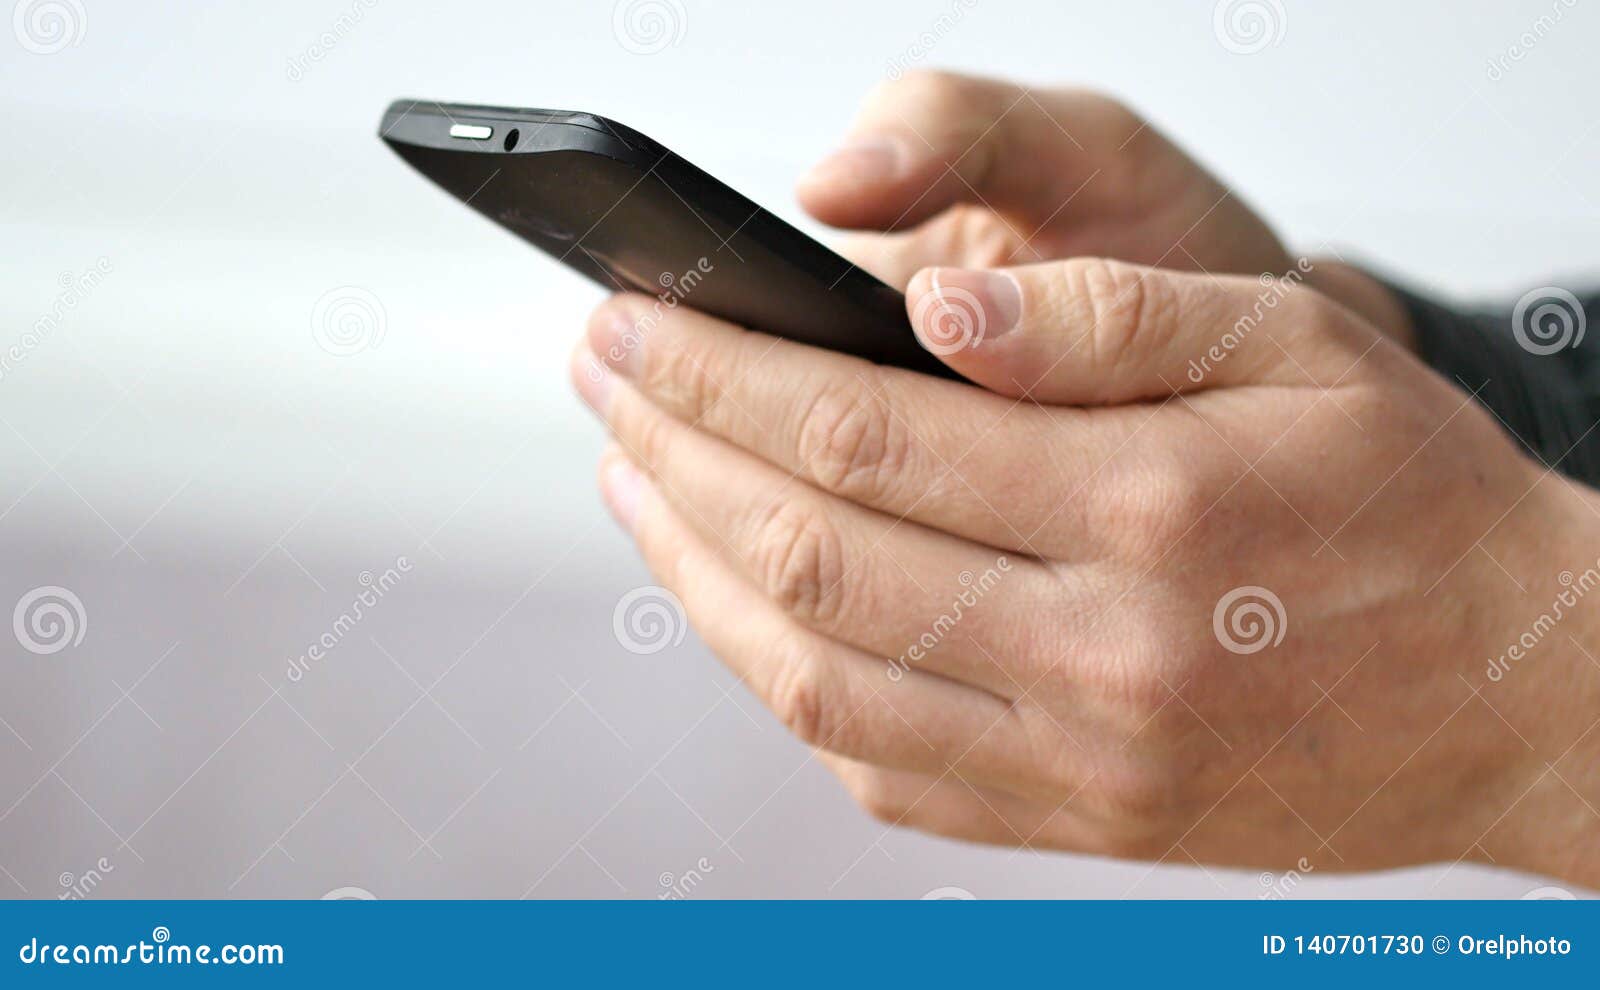 A Man Using Apps on a Mobile Touchscreen Smartphone Stock Photo - Image ...